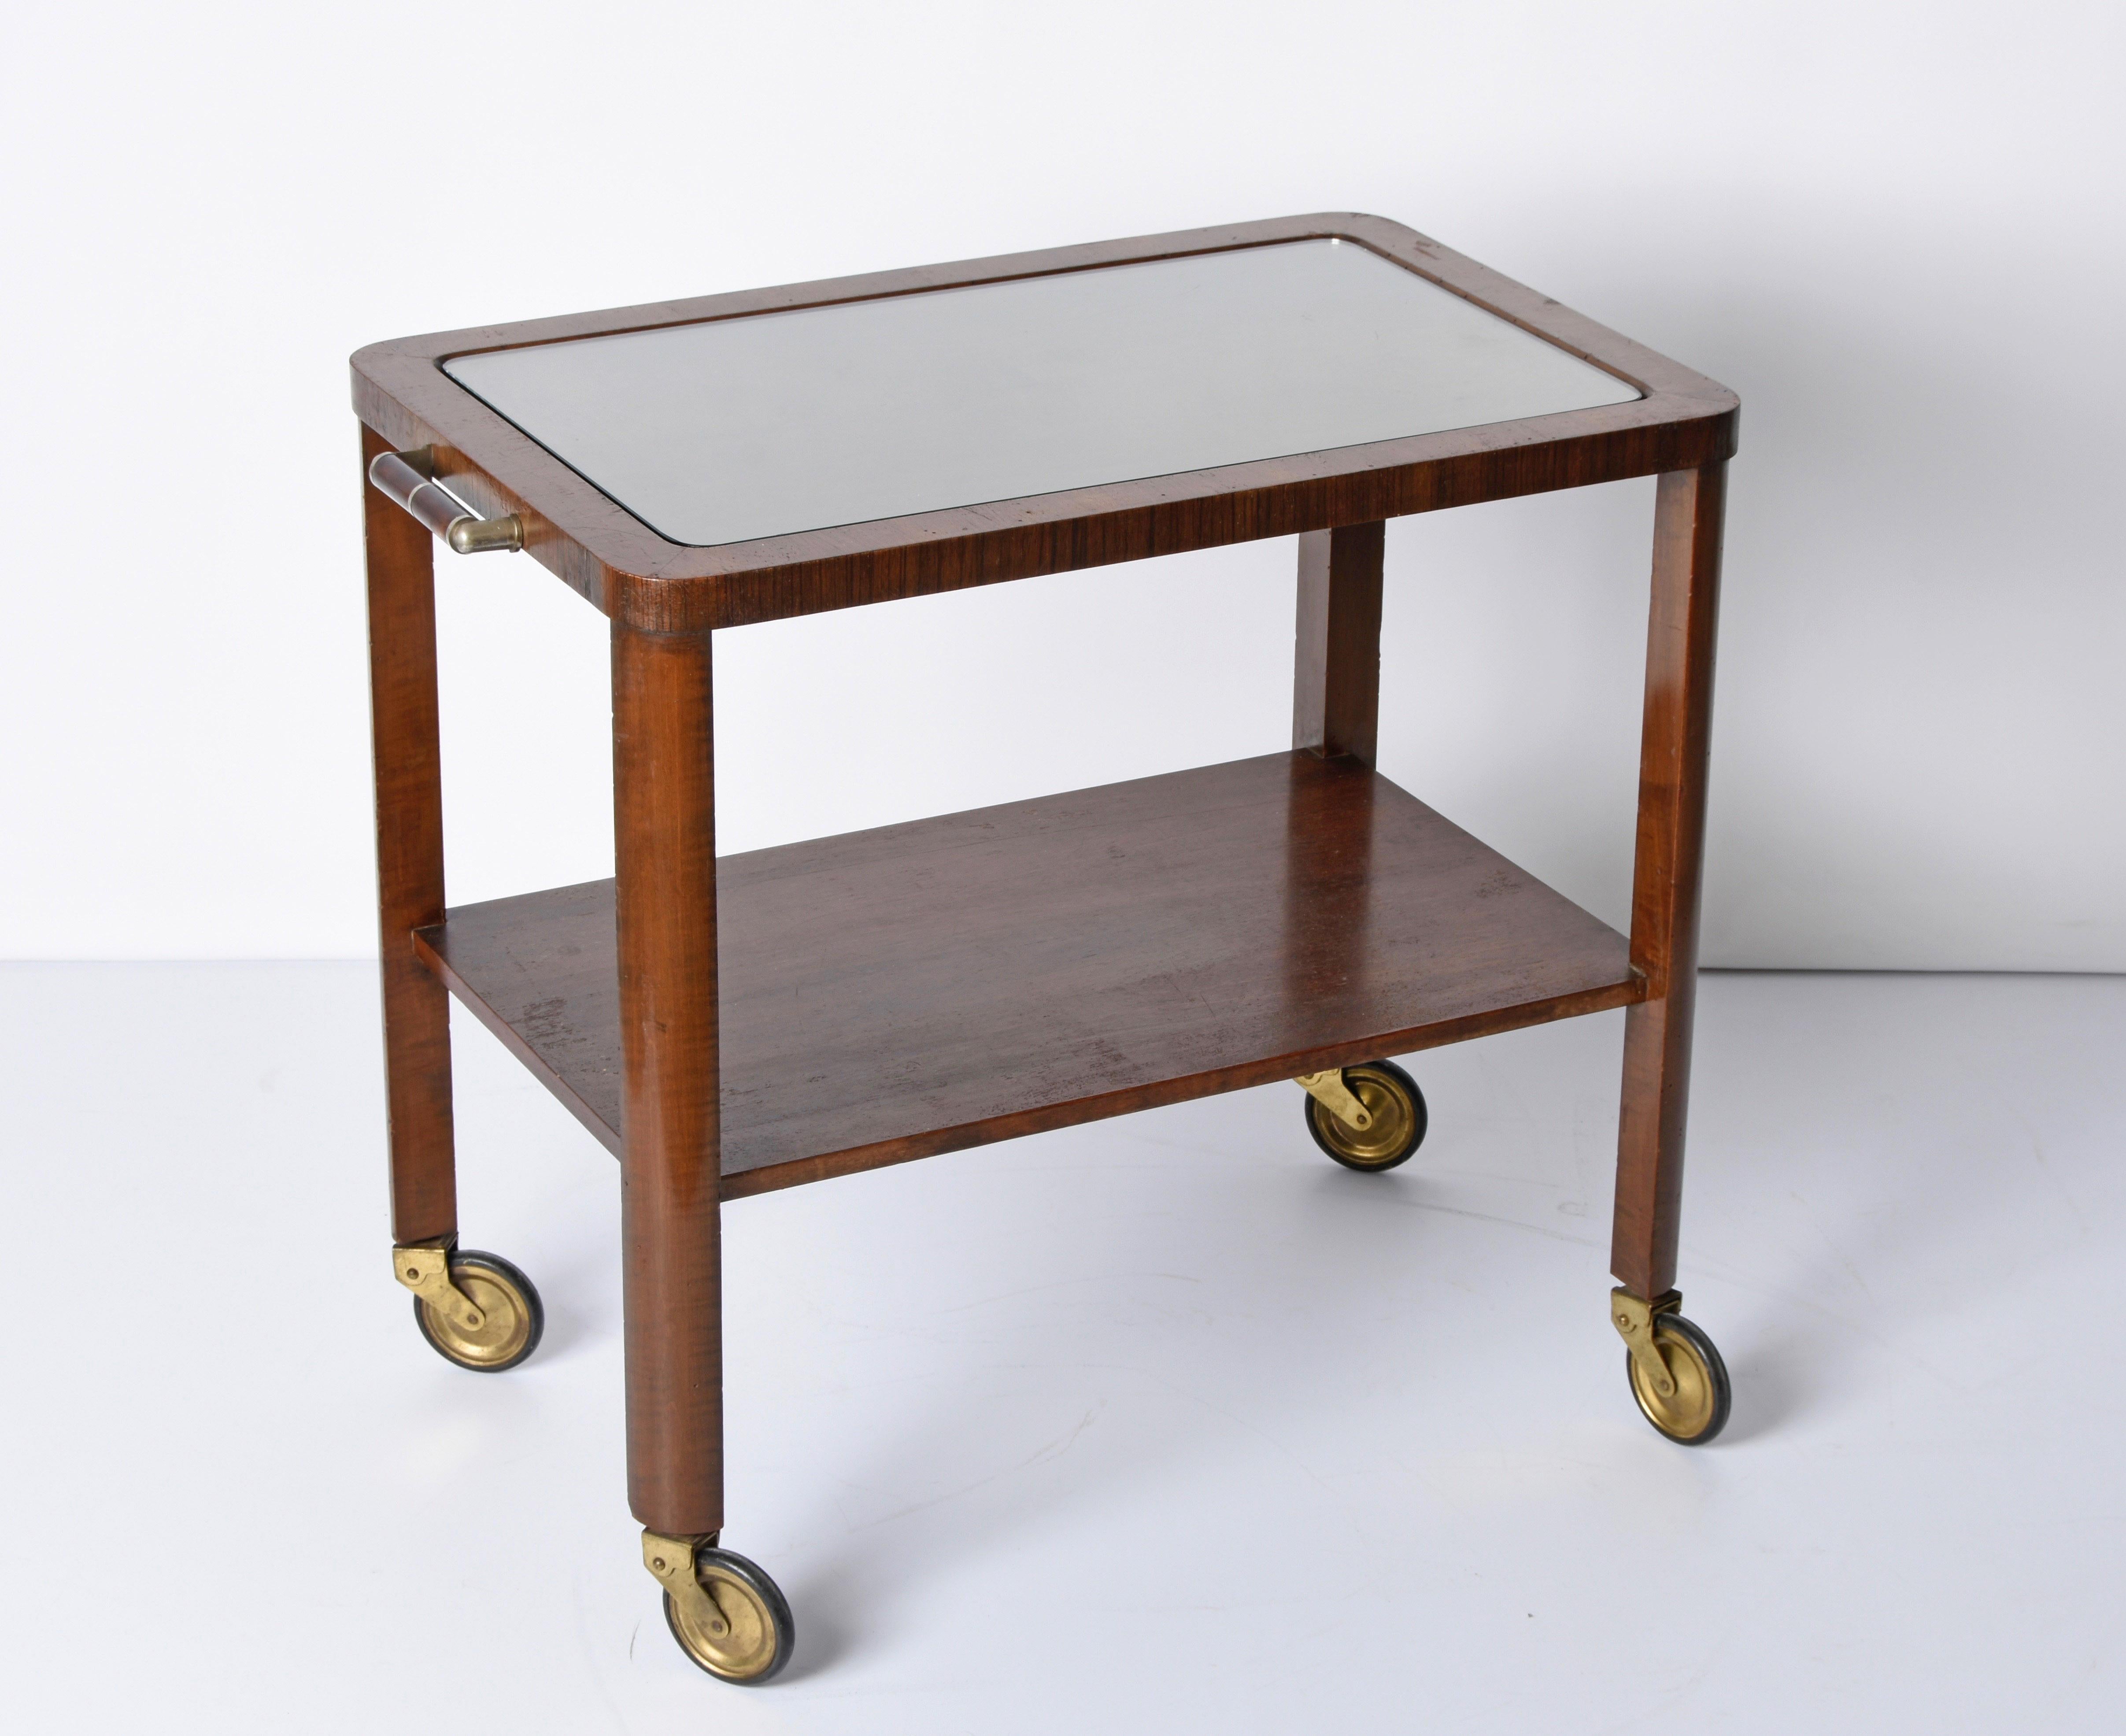 Art Deco Solid Walnut Wood and Glass Two-Levels Italian Trolley Bar Cart, 1940s For Sale 5